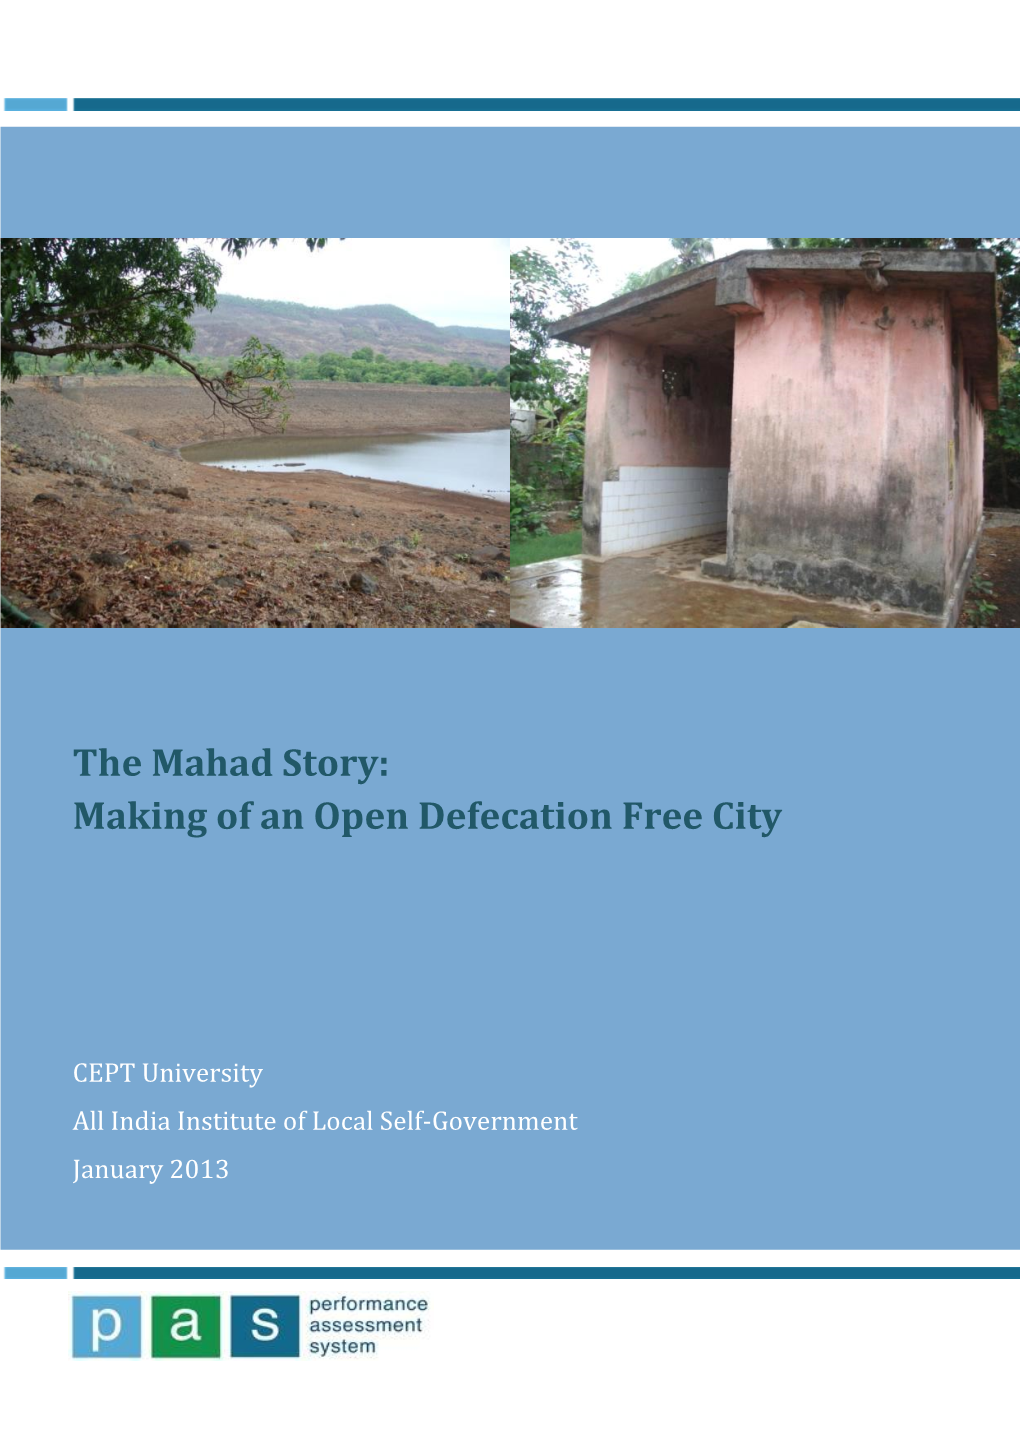 The Mahad Story: Making of an Open Defecation Free City